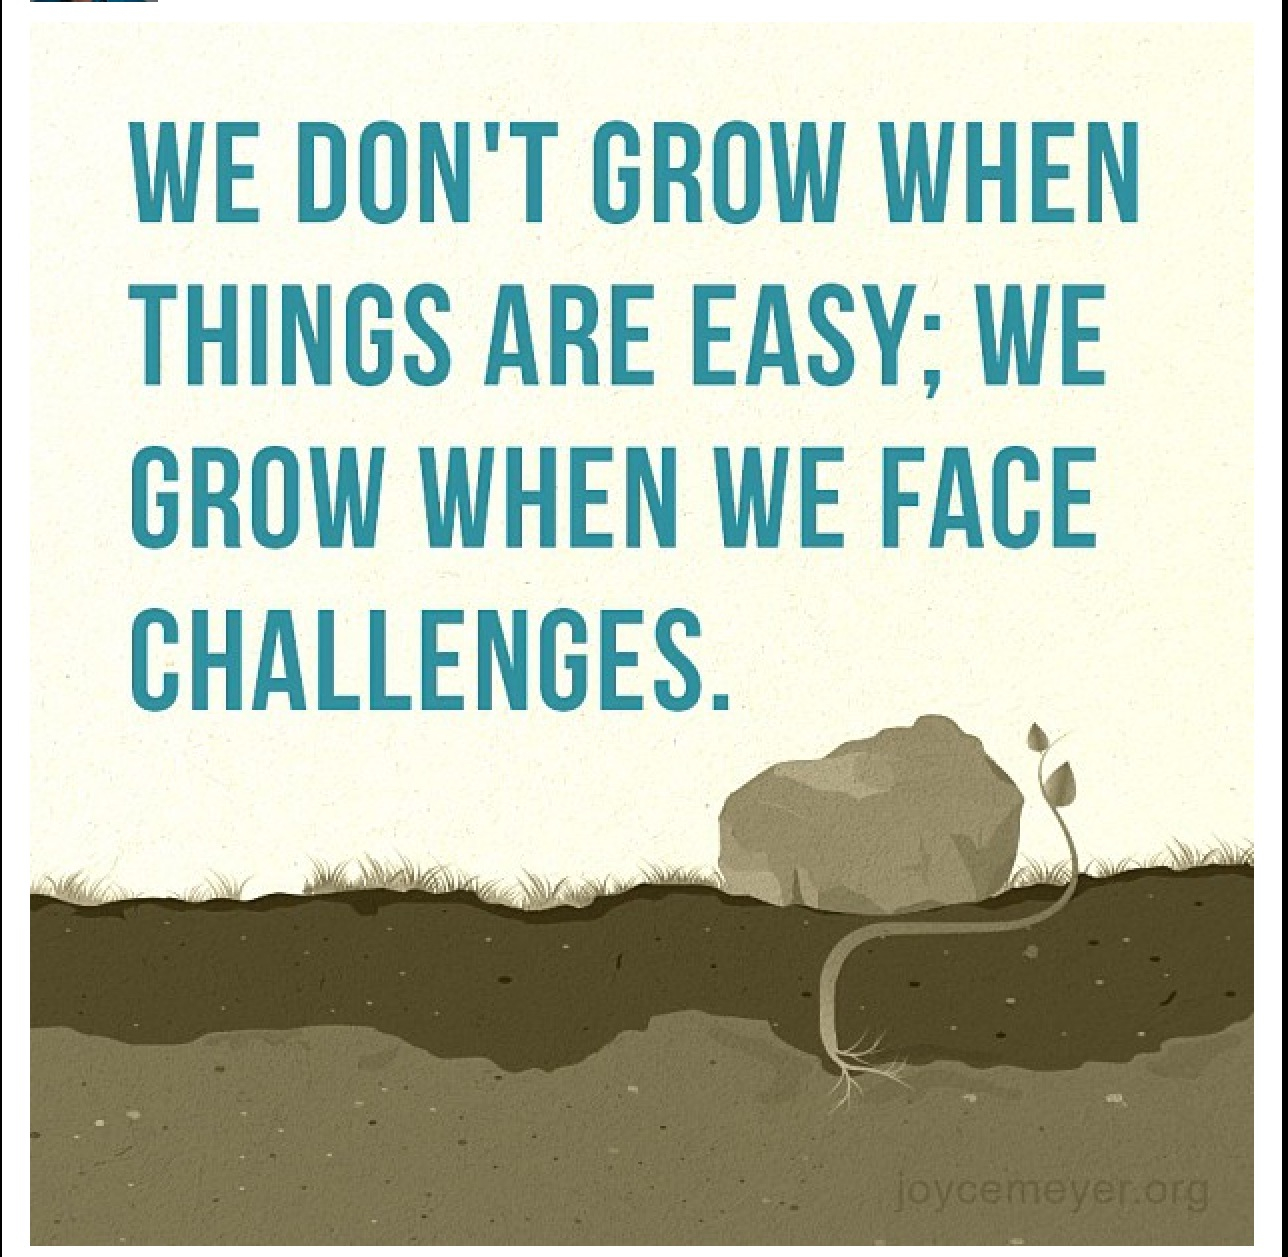 Growing Up Quotes Motivational. QuotesGram